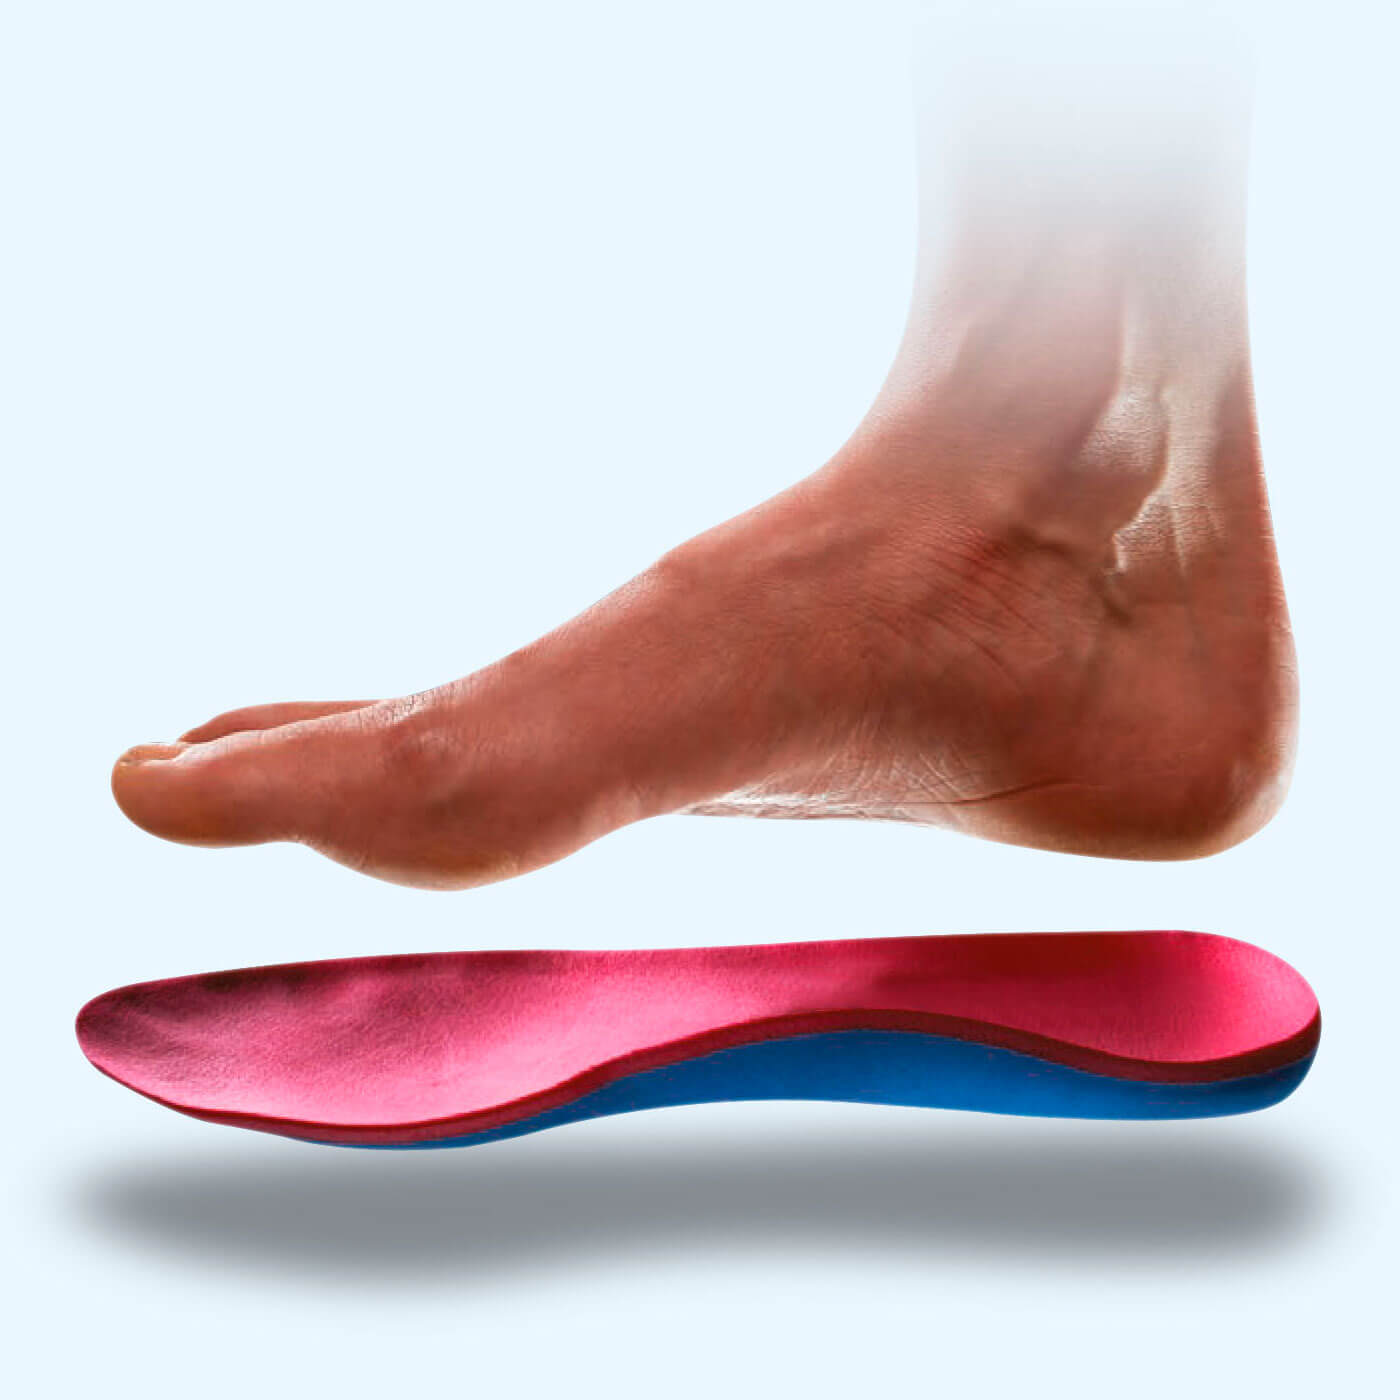 Essential Chiropractic and Healthcare Clinic - Chiropractor Podiatry Orthotics for Foot Relief